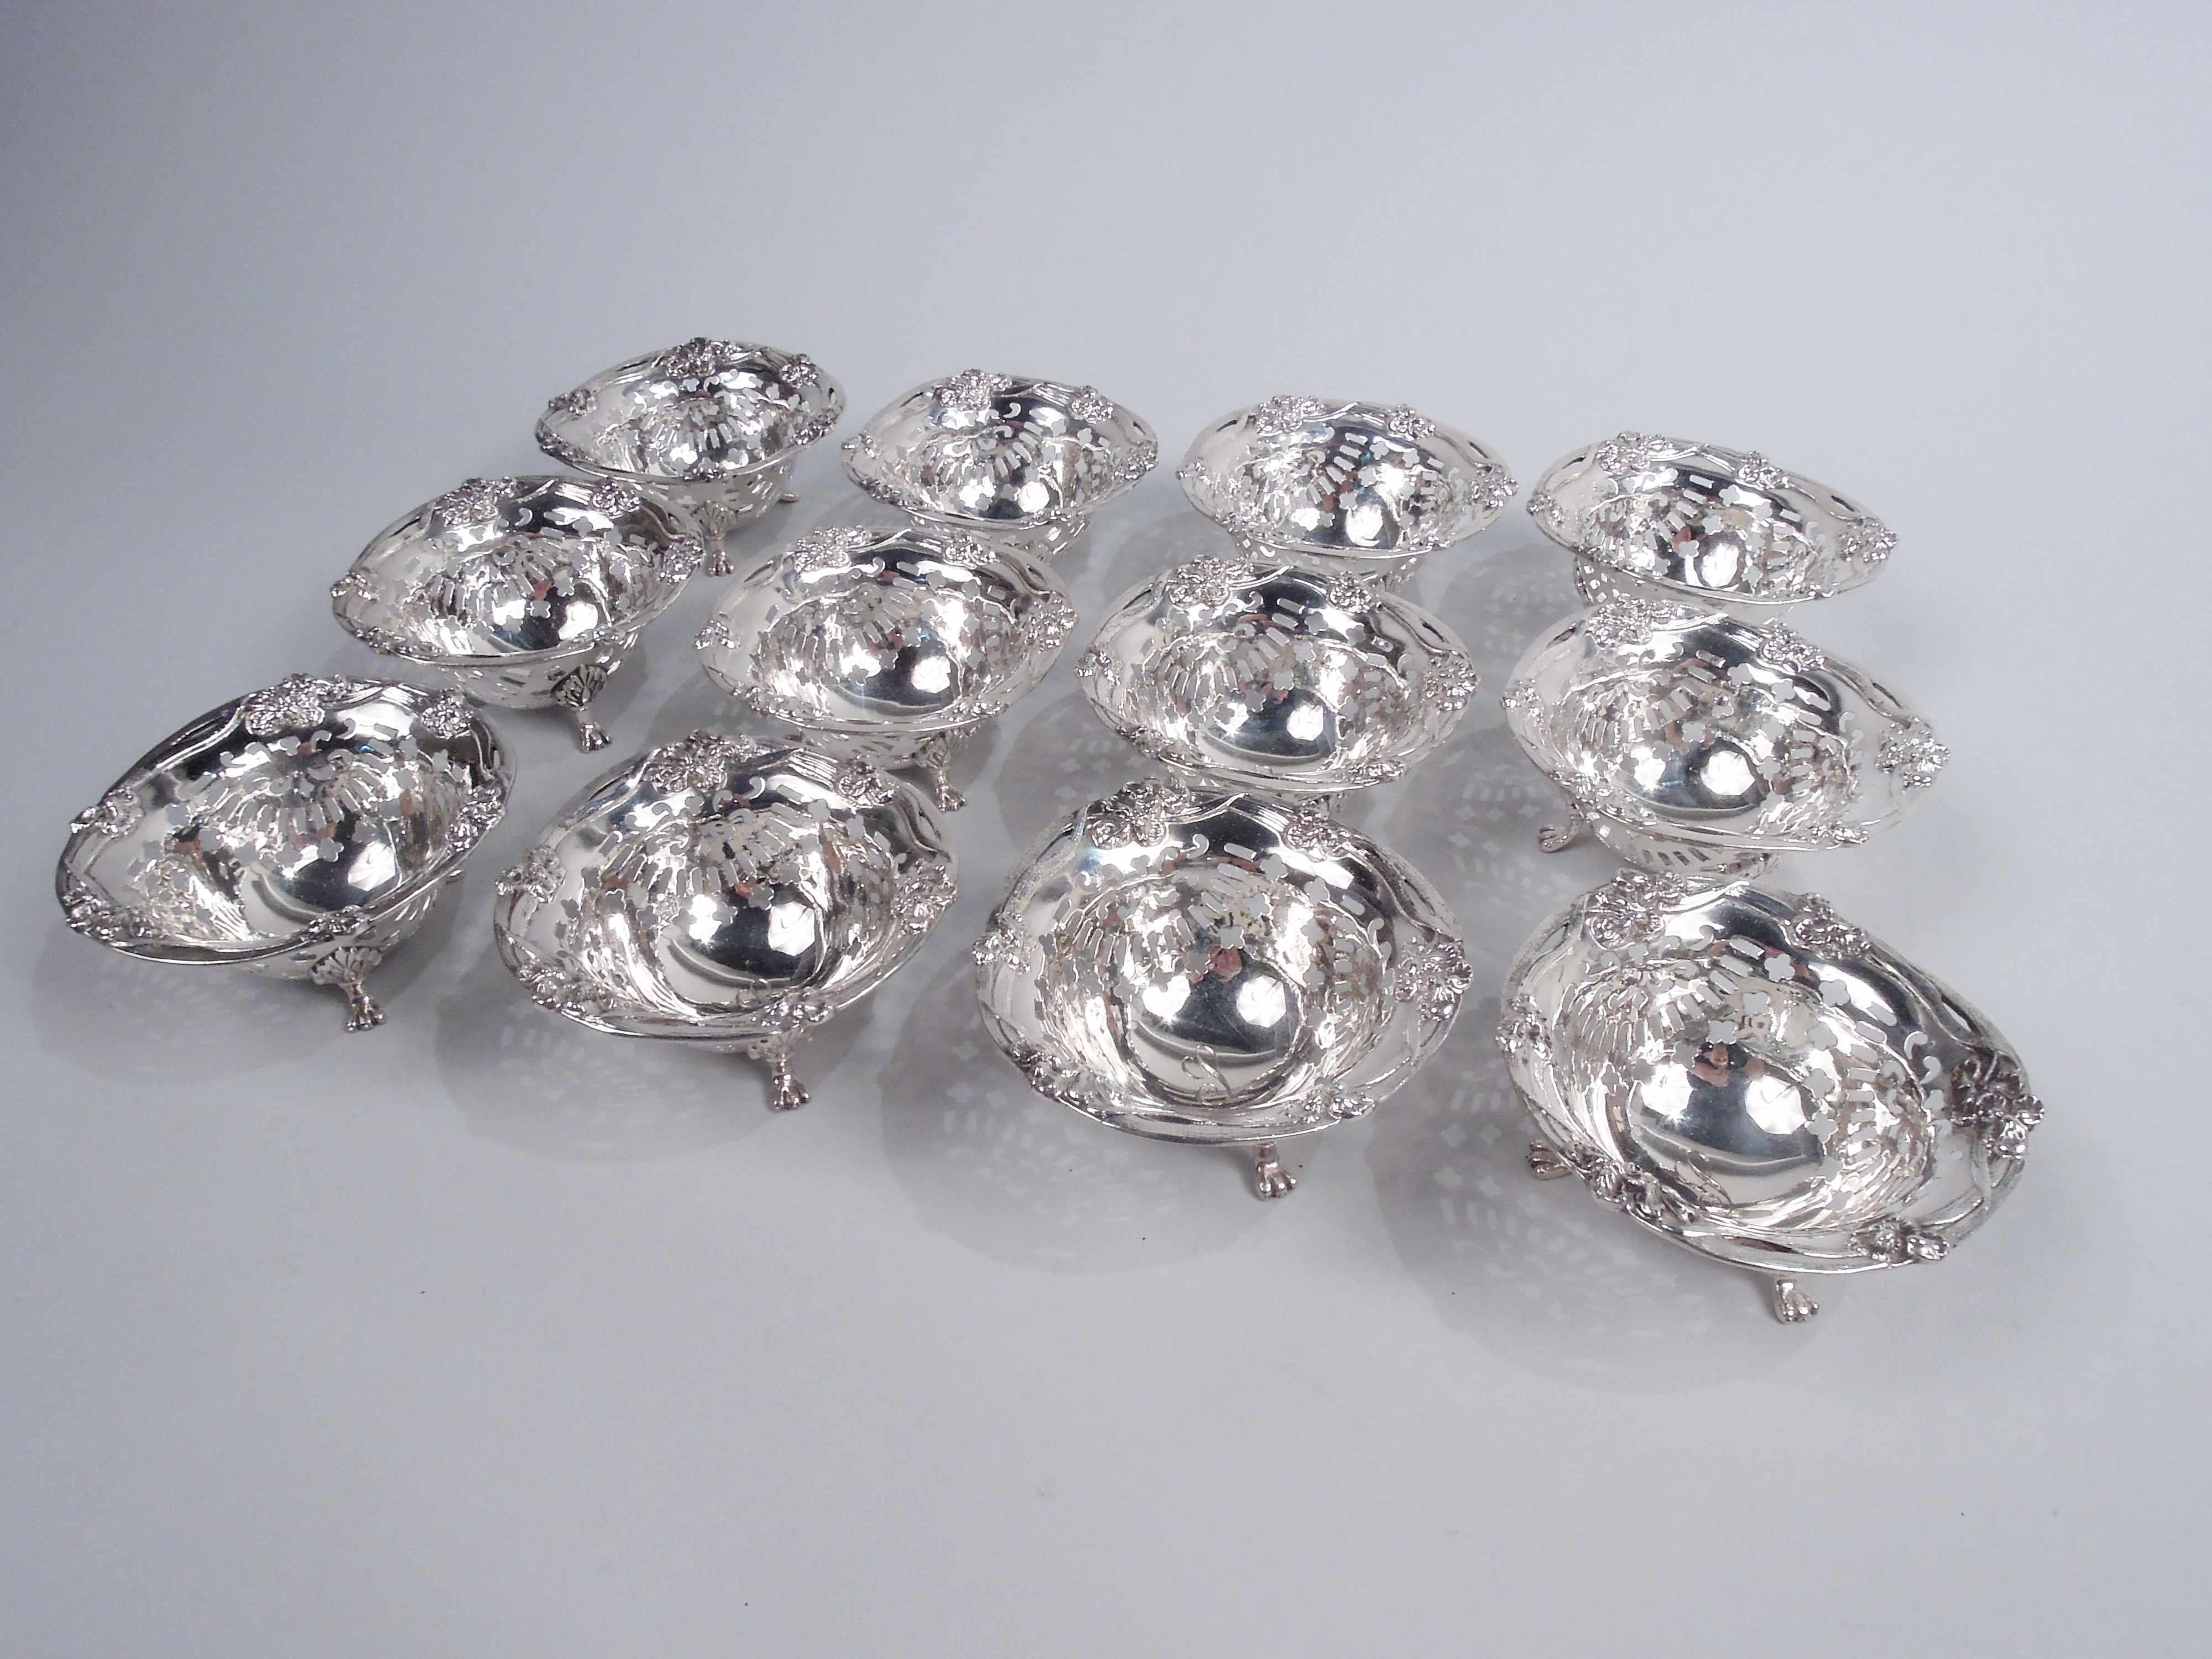 Set of 12 Art Nouveau sterling silver nut dishes. Made by Howard Sterling Co. in Providence, ca 1900. Each: Round and pierced with 3 leaf-mounted paw supports. Cast and open tendril rim with flower heads. Well has engraved single-letter monogram.